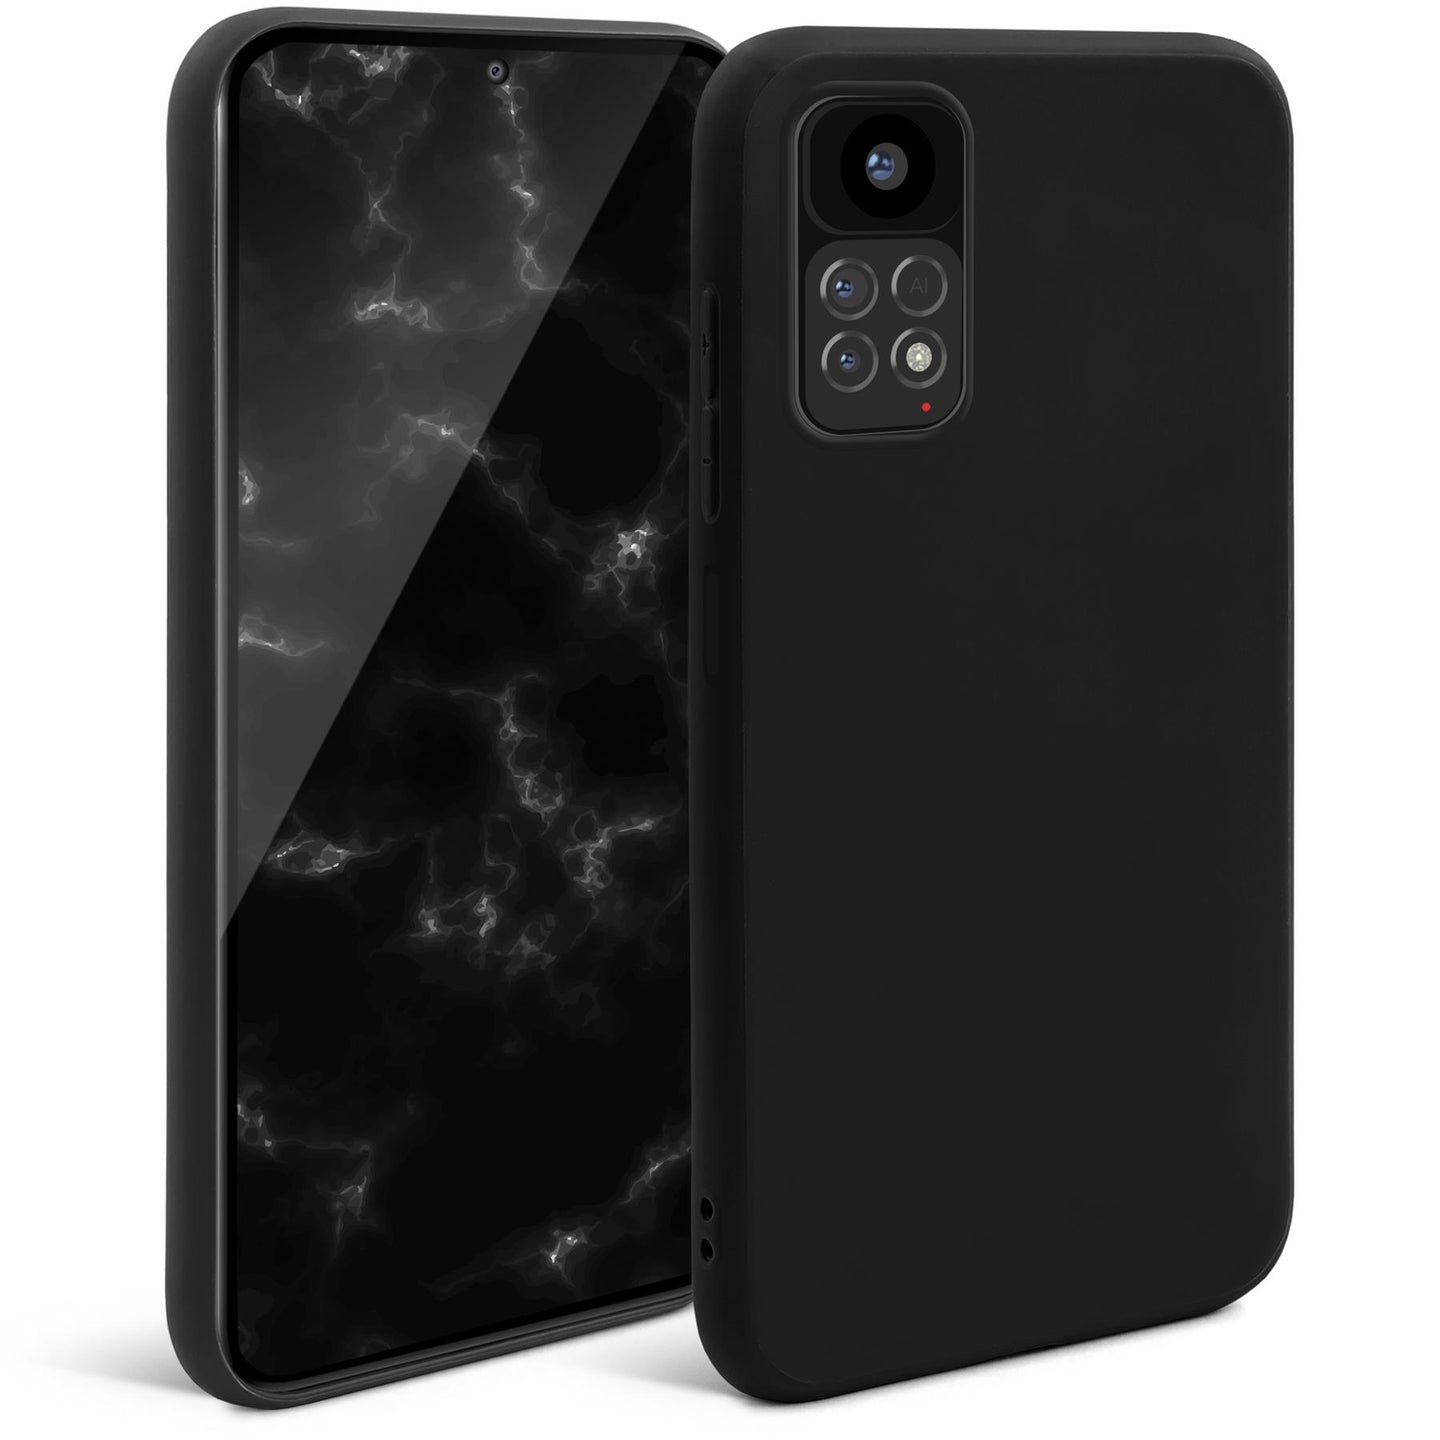 Moozy Minimalist Series Silicone Case for Xiaomi Redmi Note 11 Pro 5G and 4G, Black - Matte Finish Lightweight Mobile Phone Case Slim Soft Protective TPU Cover with Matte Surface